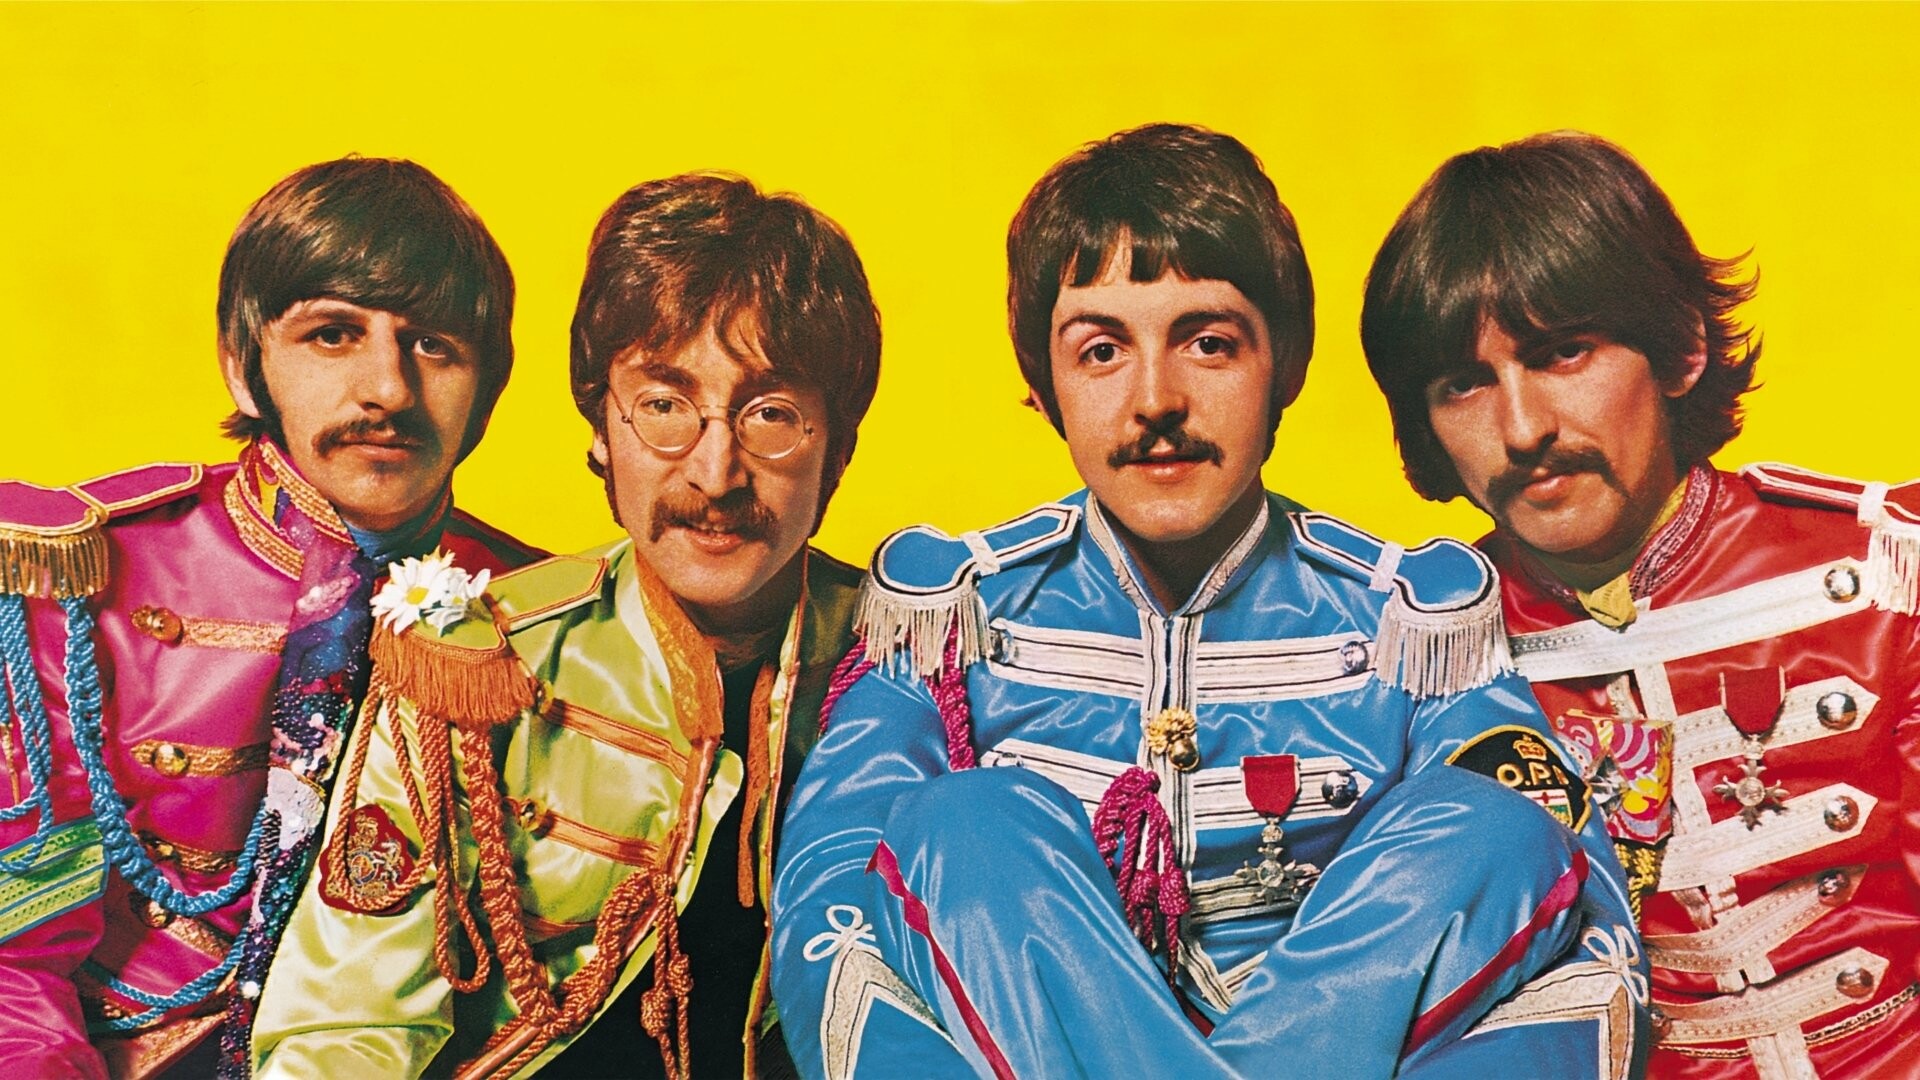 The Beatles: The band recorded Sgt. Pepper's Lonely Hearts Club Band, beginning in late November 1966. 1920x1080 Full HD Wallpaper.